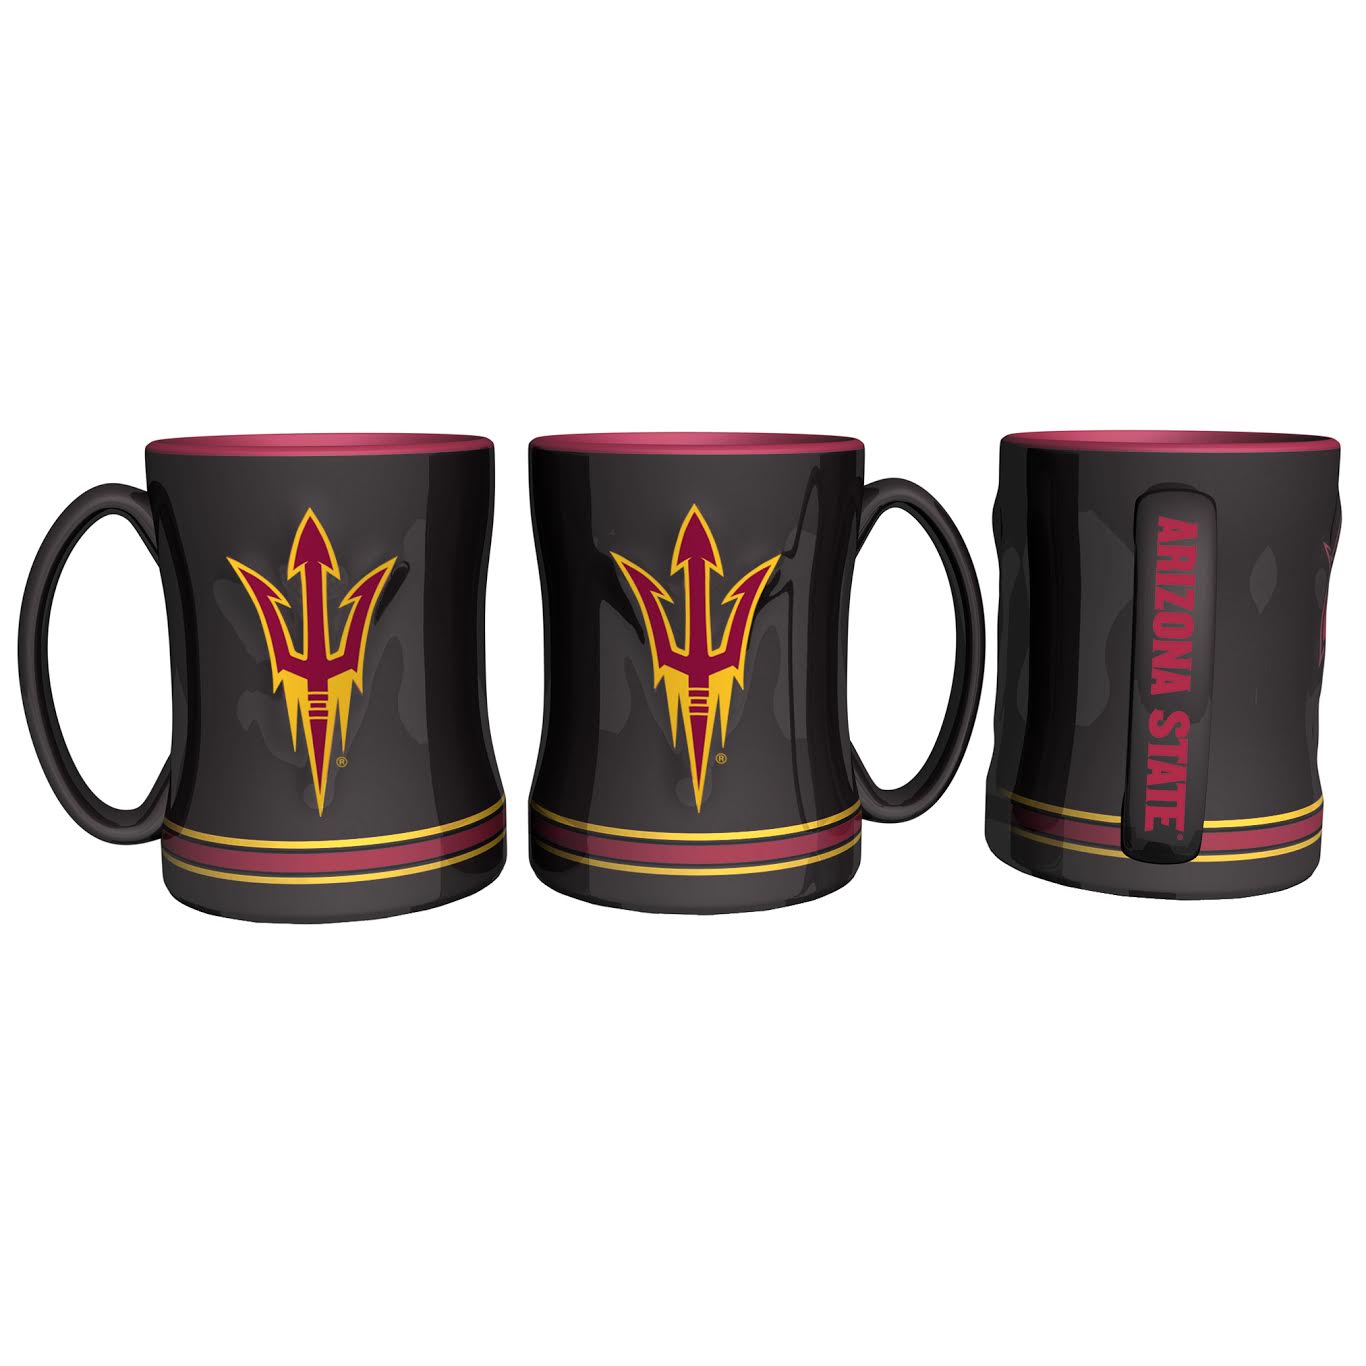 Front, Back, and Side views of ASU black mug with pitchfork on front and back and 'Arizona State' down the handle